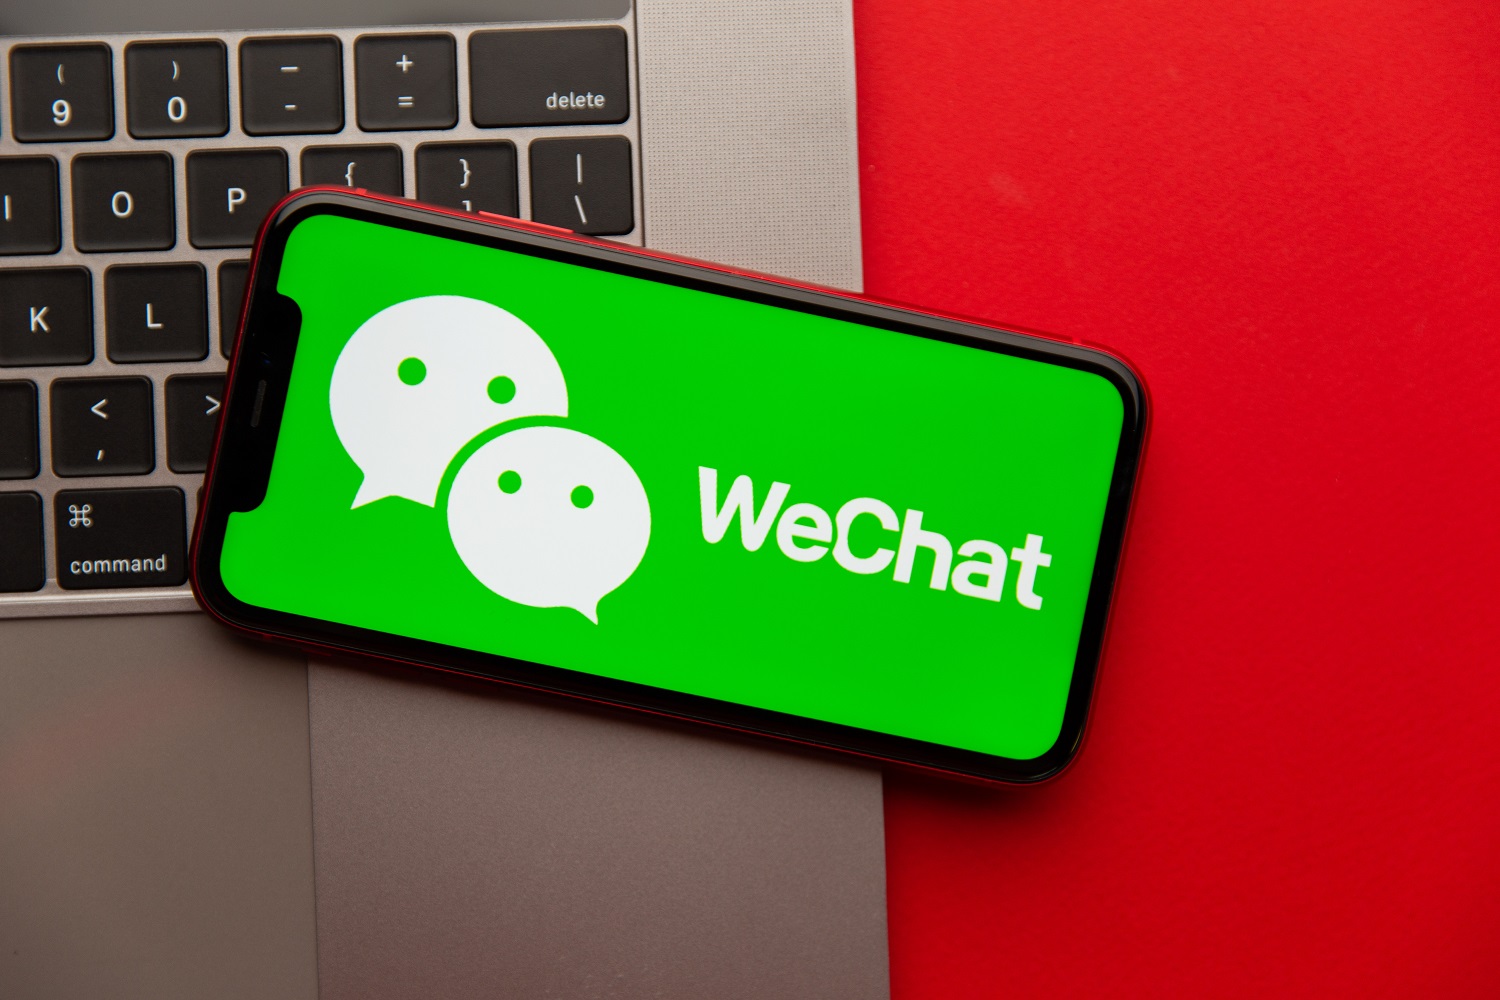 The WeChat mobile app running on the screen of a smartphone with a laptop keyboard in the background.